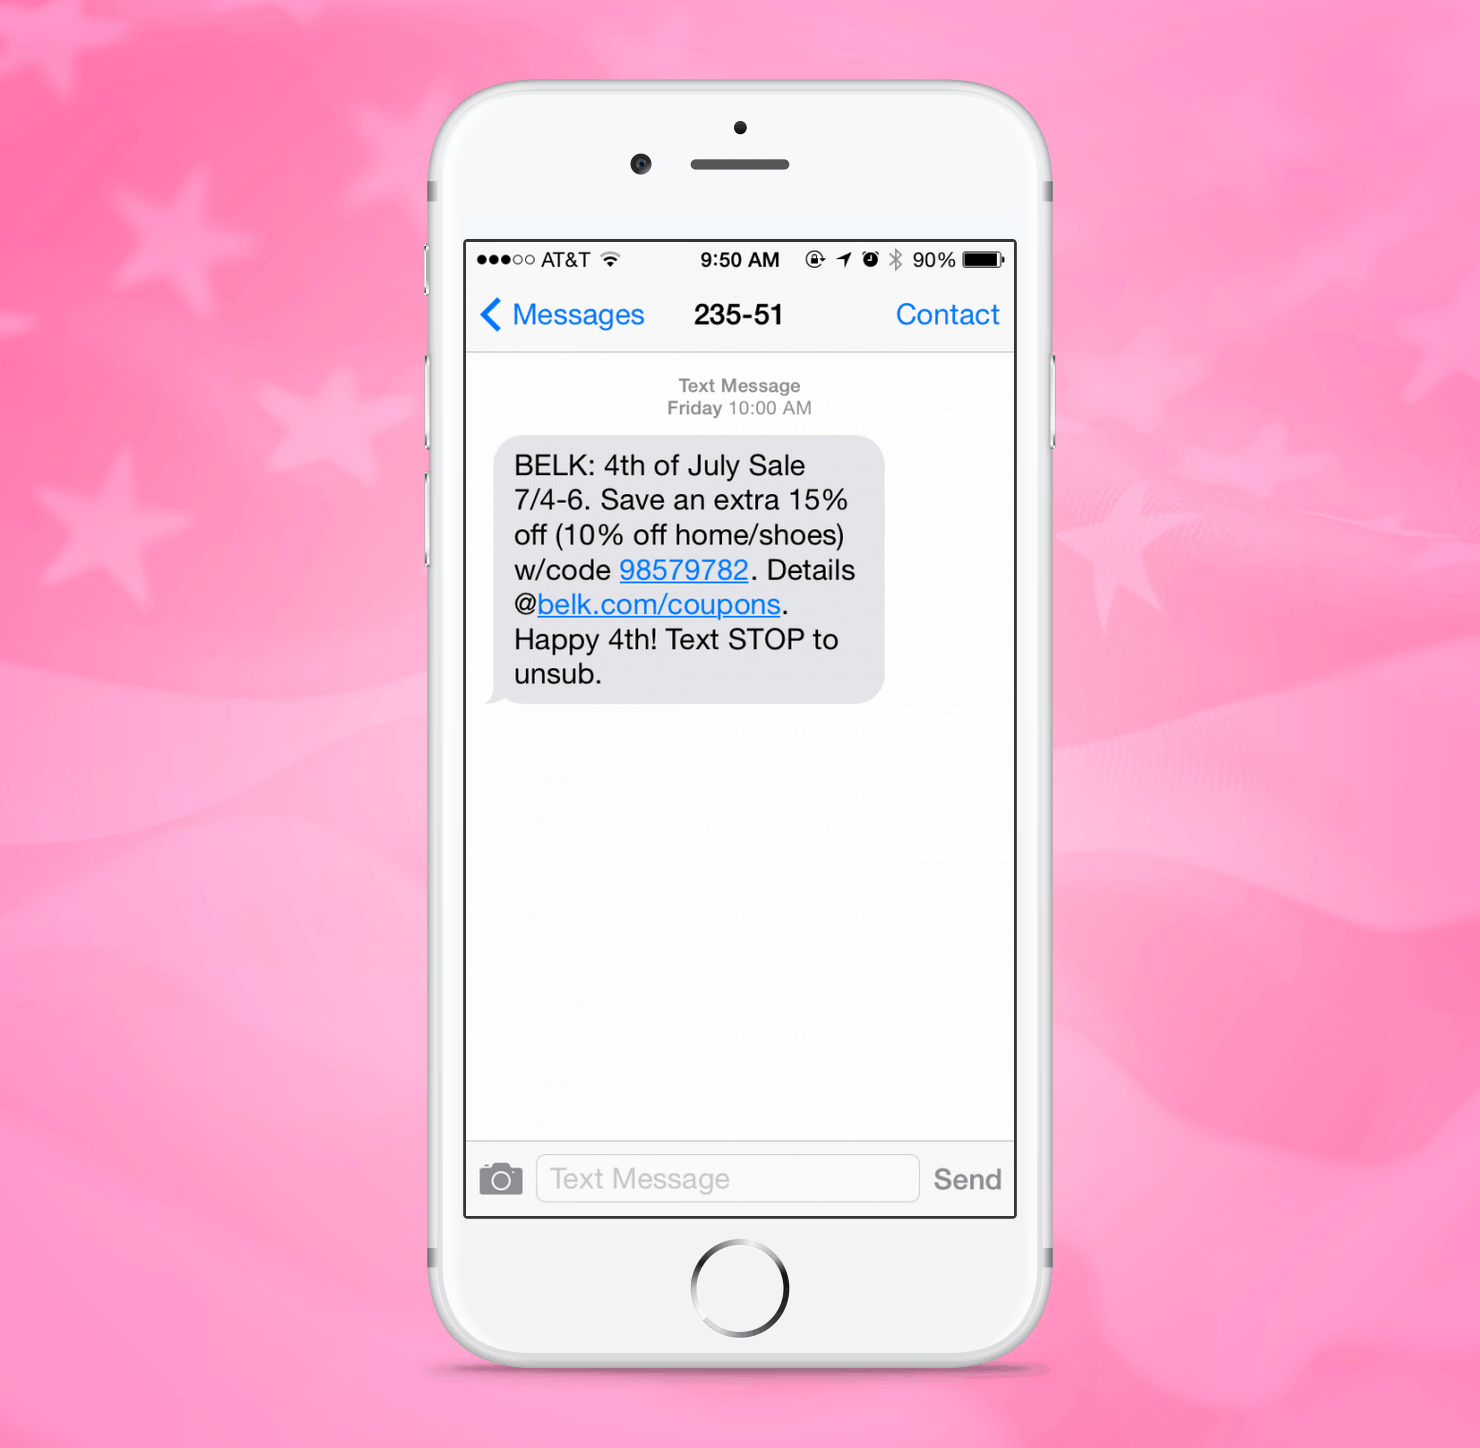 Belk SMS Promotion Example from Independence Day